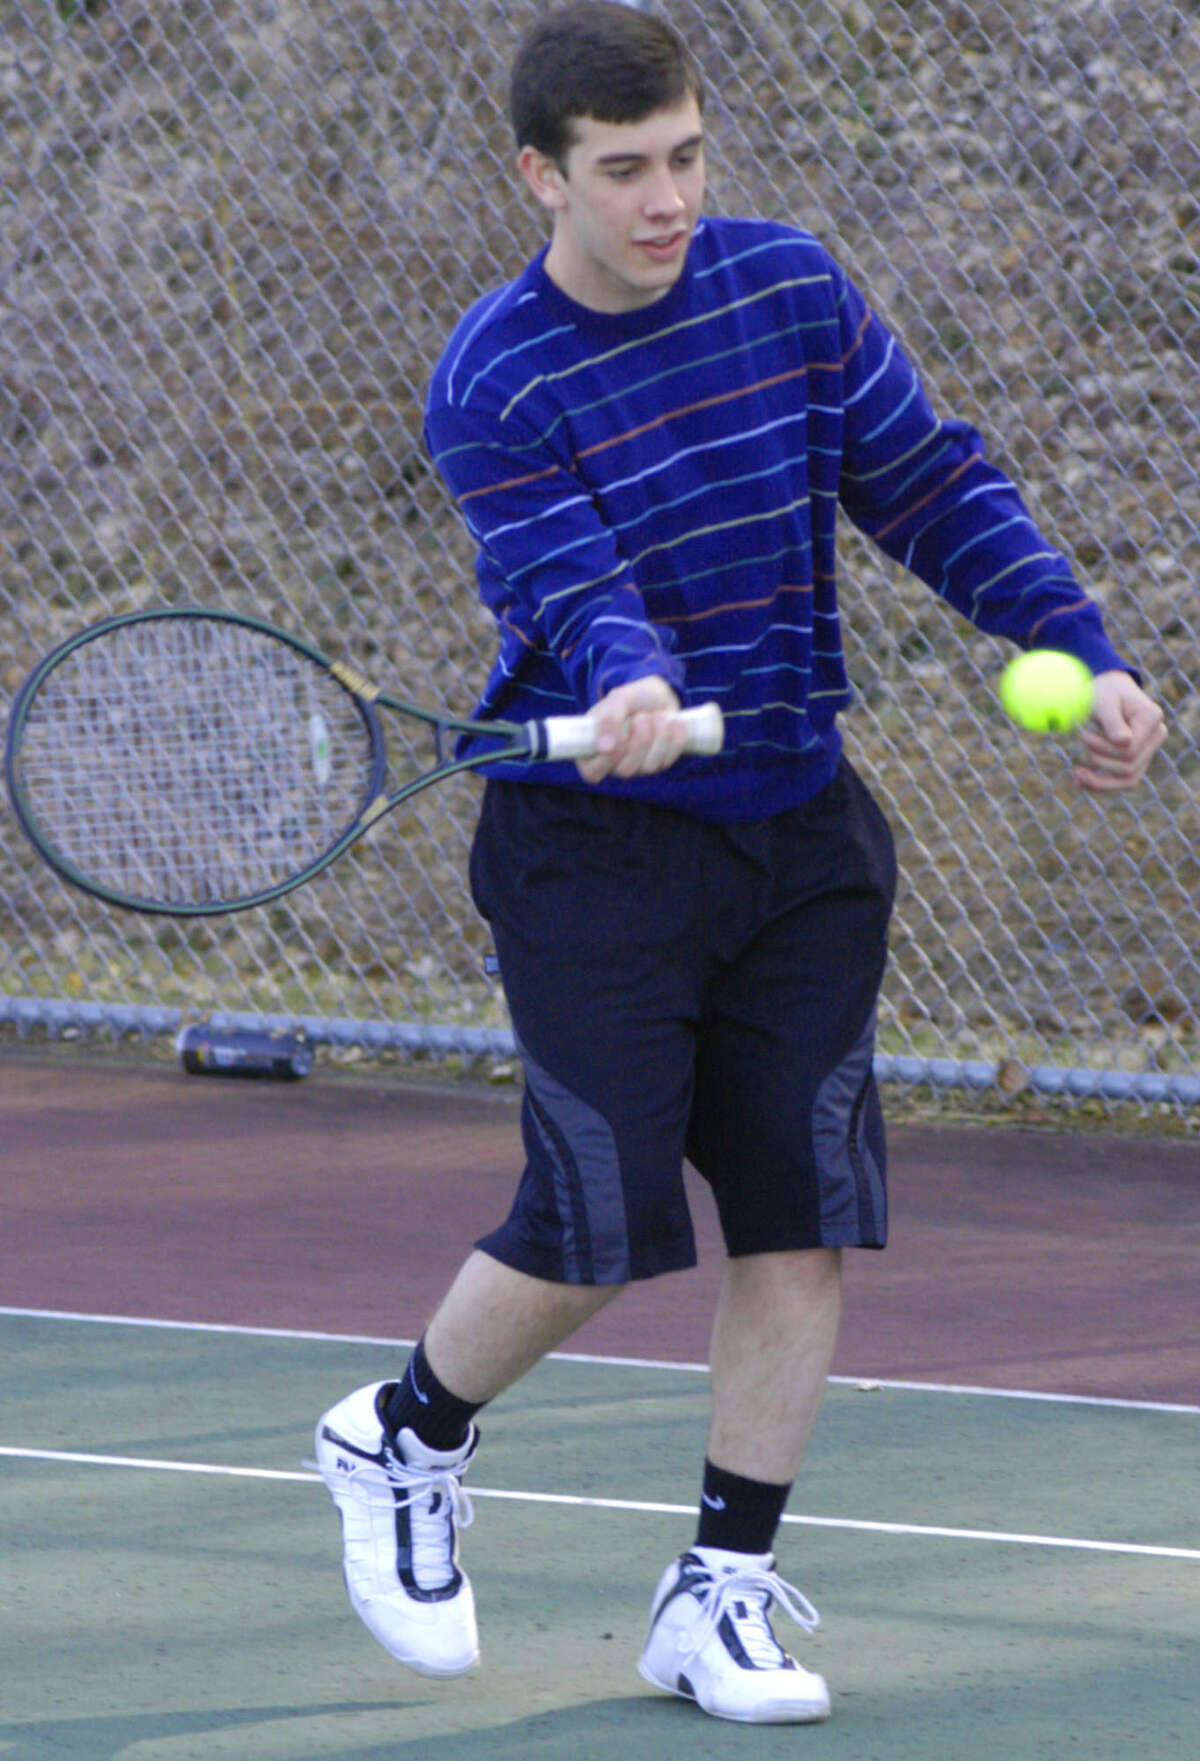 Daniel Buser of the Green Wave eases into a forehand for New Milford High School boys' tennis, April 2013